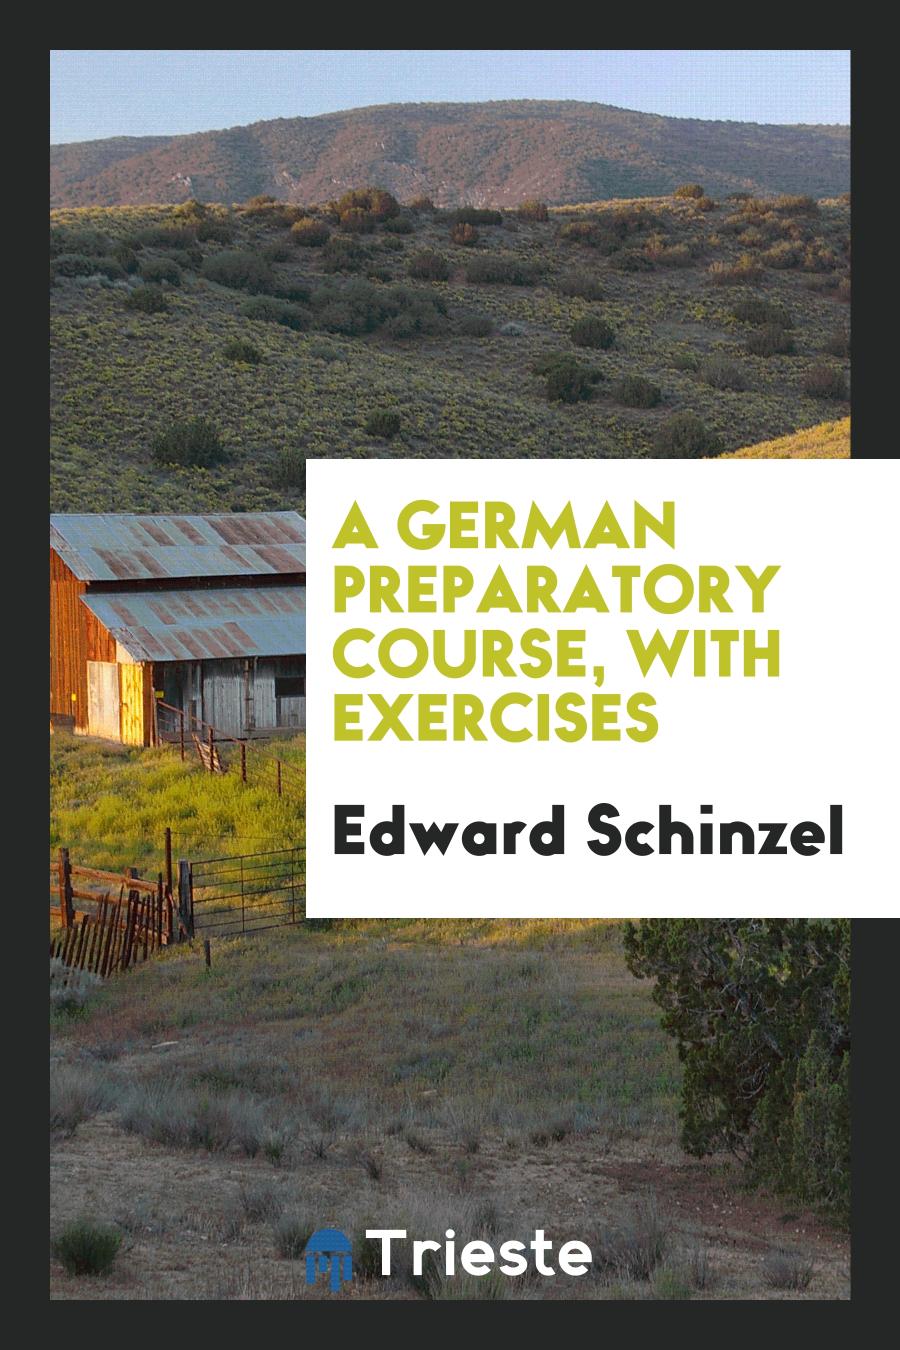 A German preparatory course, with exercises